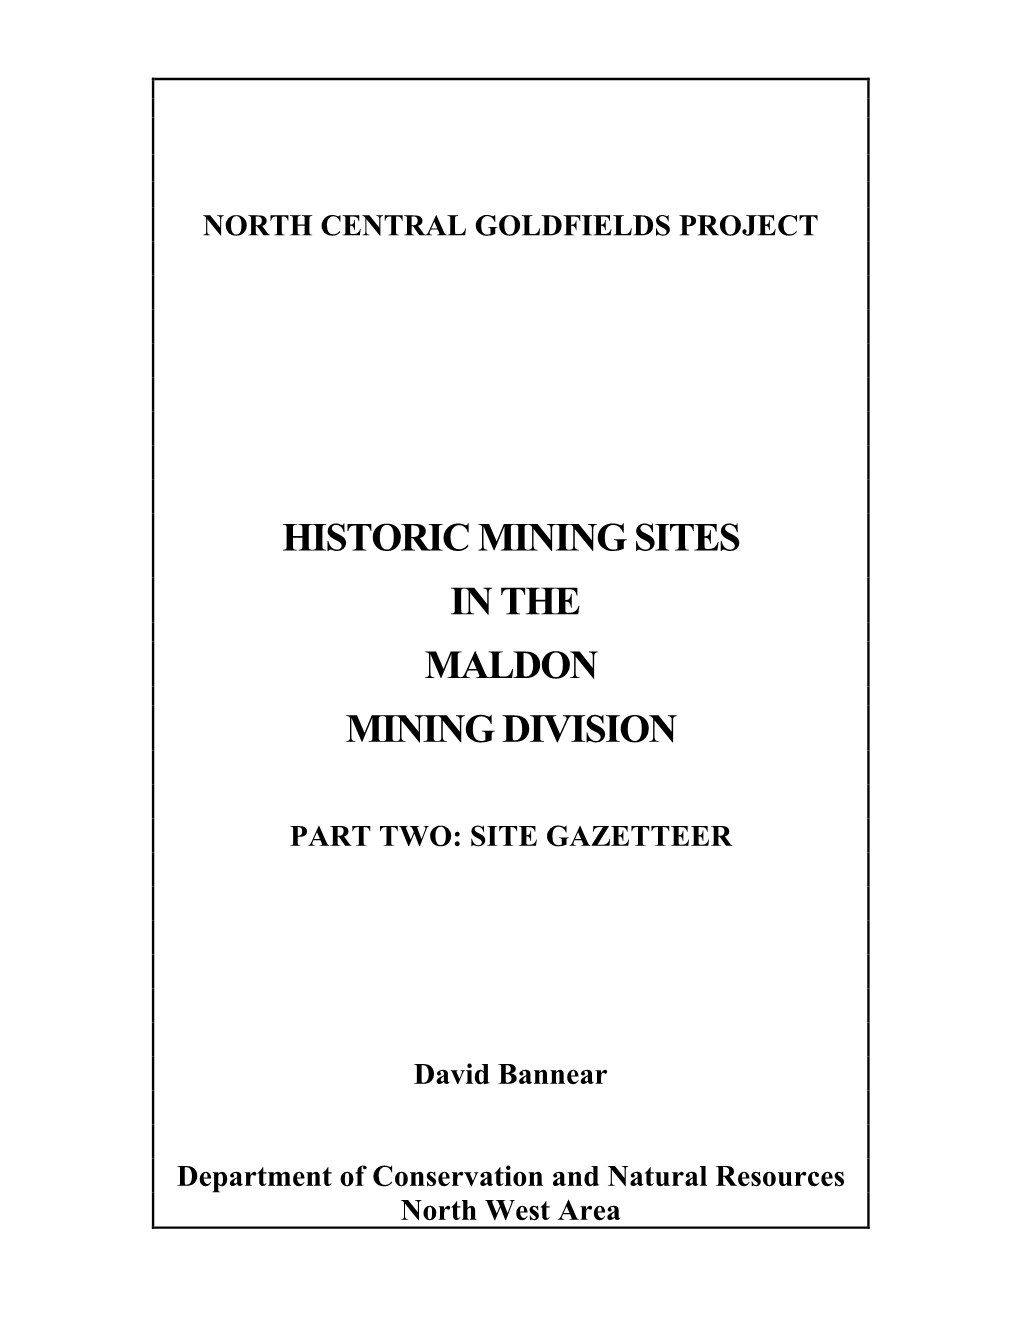 Historic Mining Sites in the Maldon Mining Division